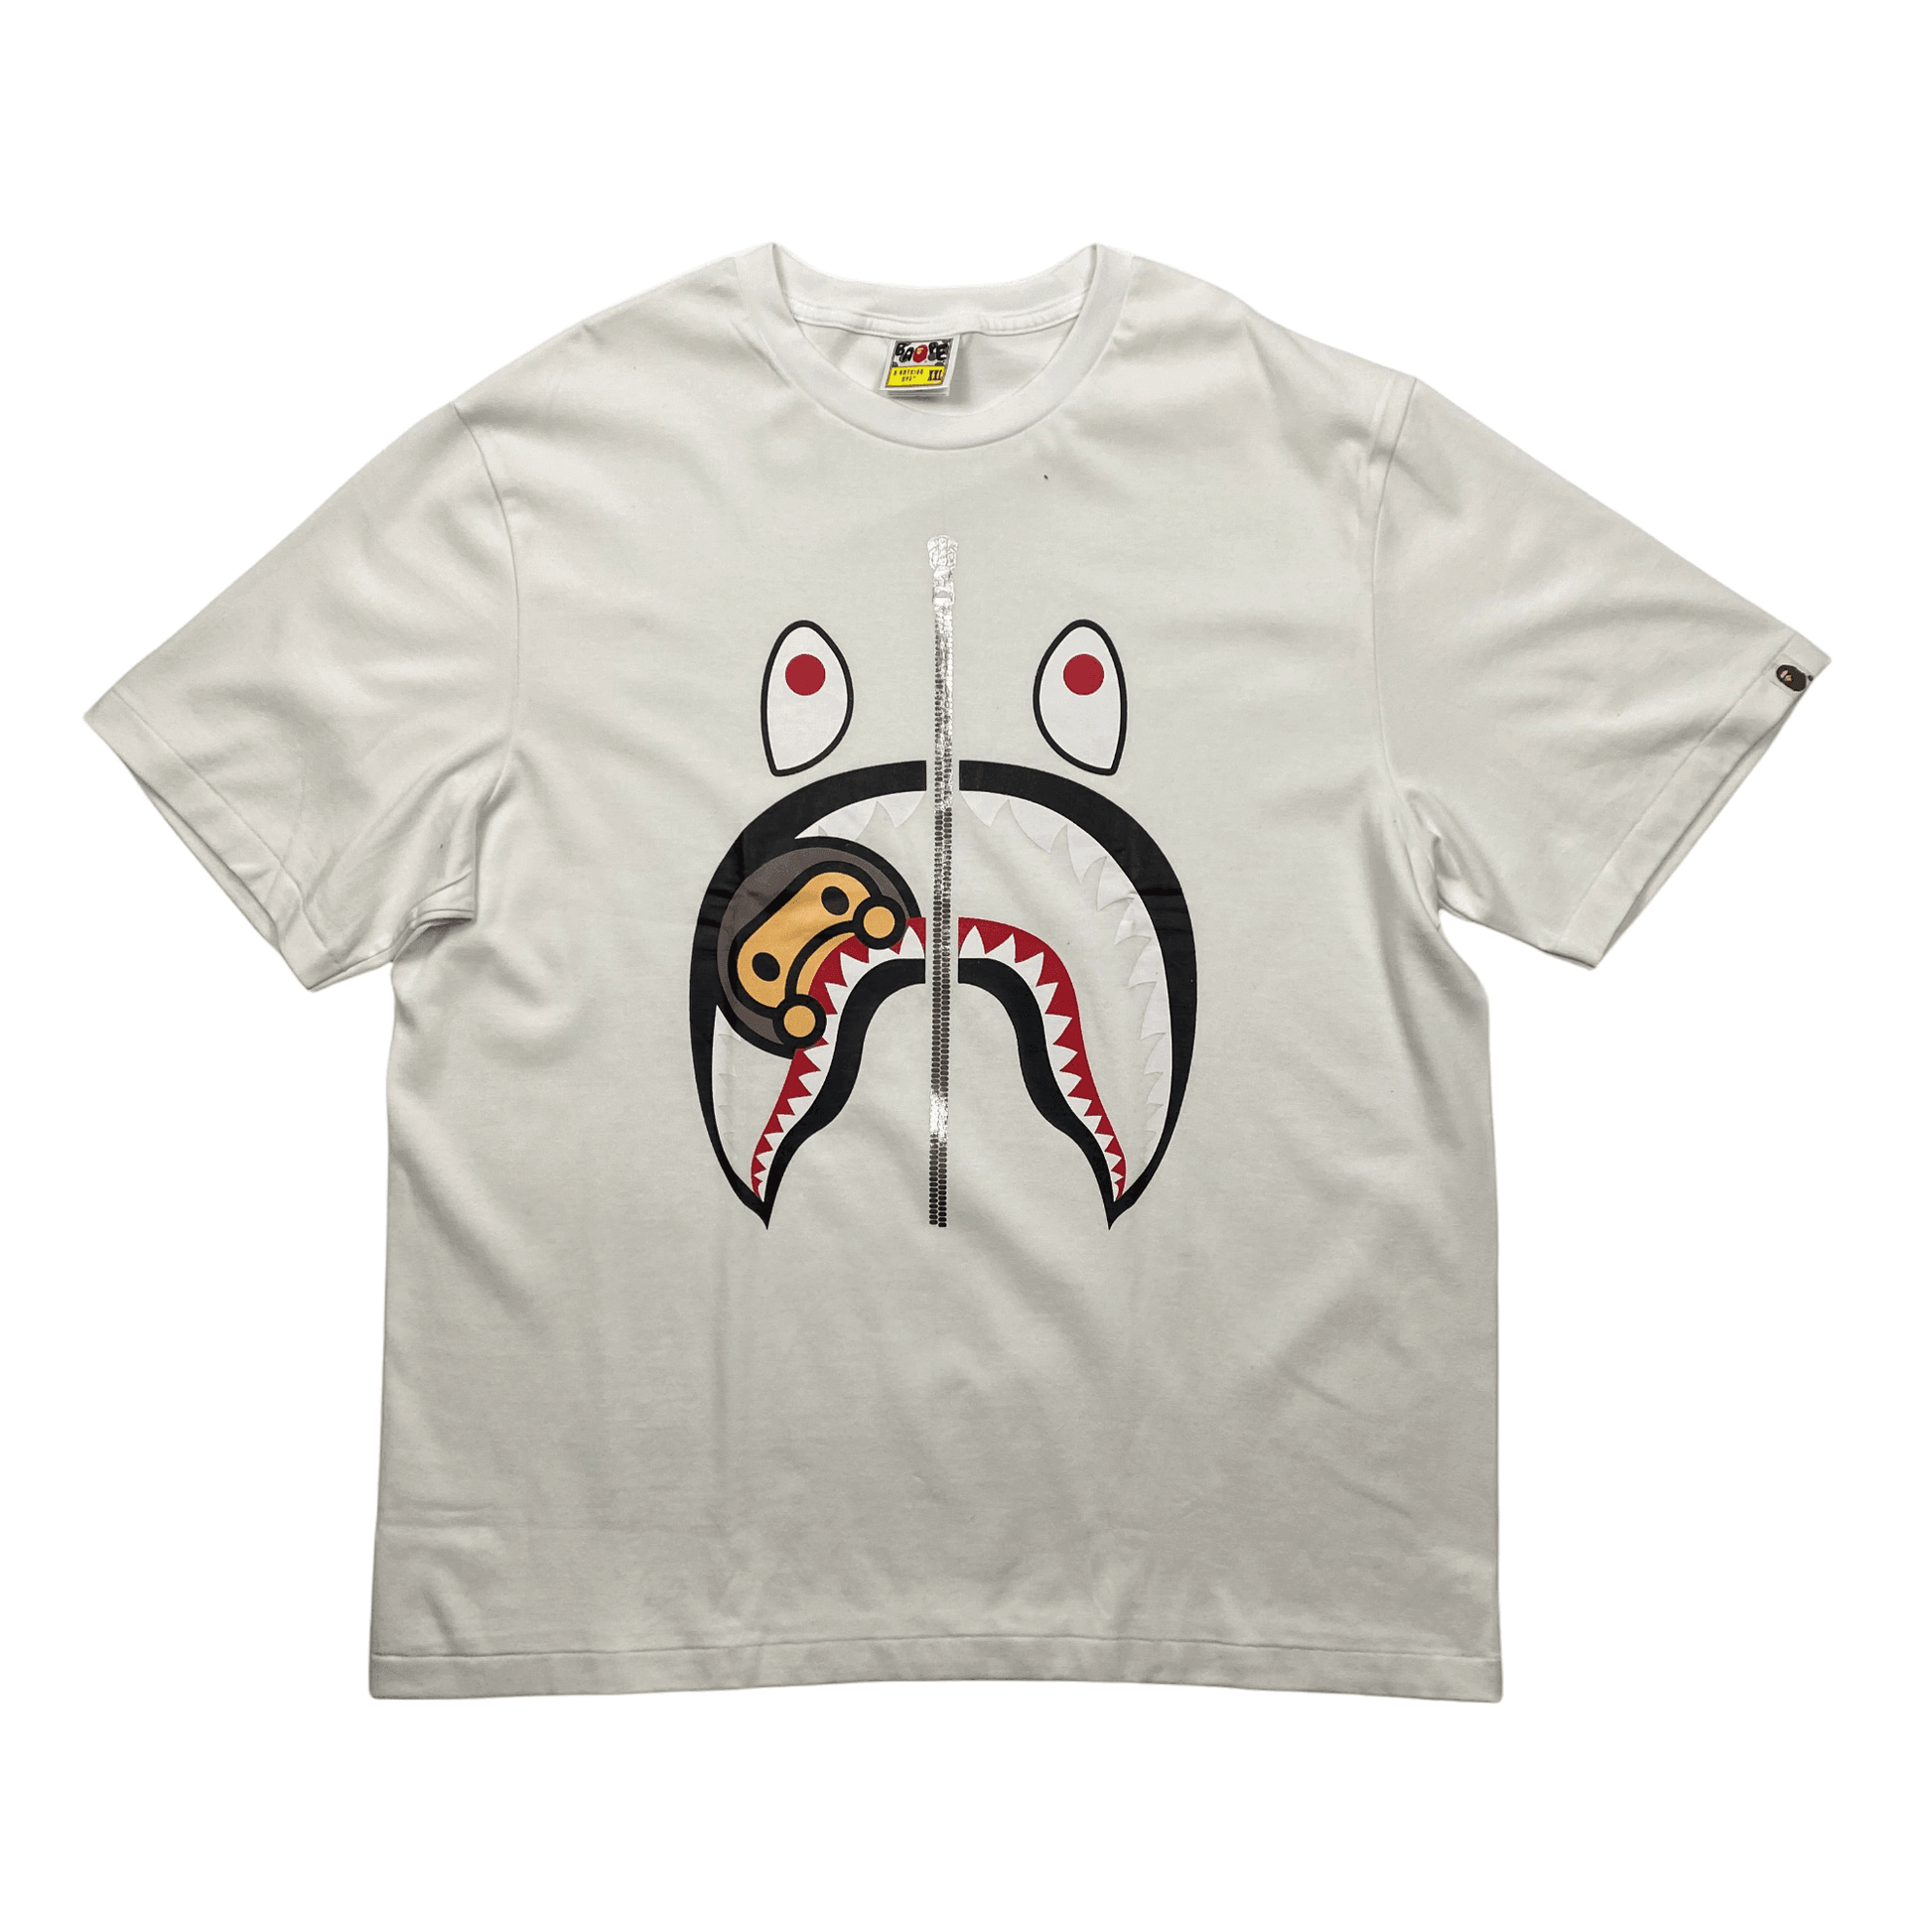 White A Bathing Ape (BAPE) Tee - XXL (Recommended Size - Extra Large) - The Streetwear Studio